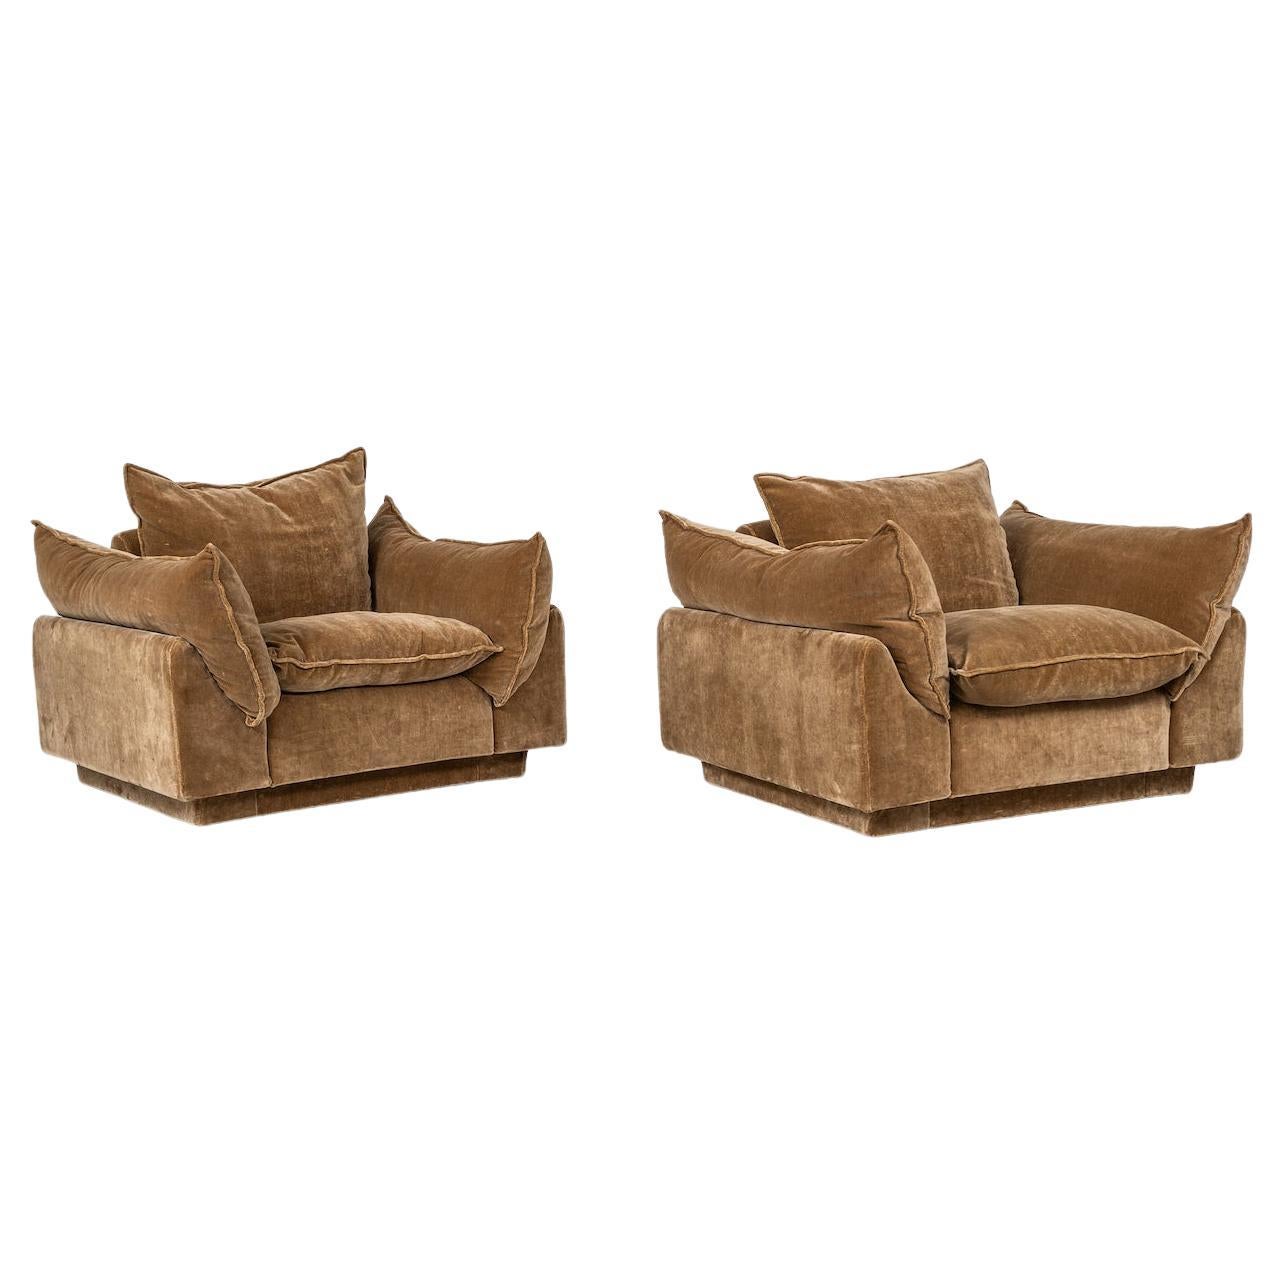  Pair of Armchairs "Cado" by Gunnar Gravesen and David Lewis Divano for ICF  For Sale